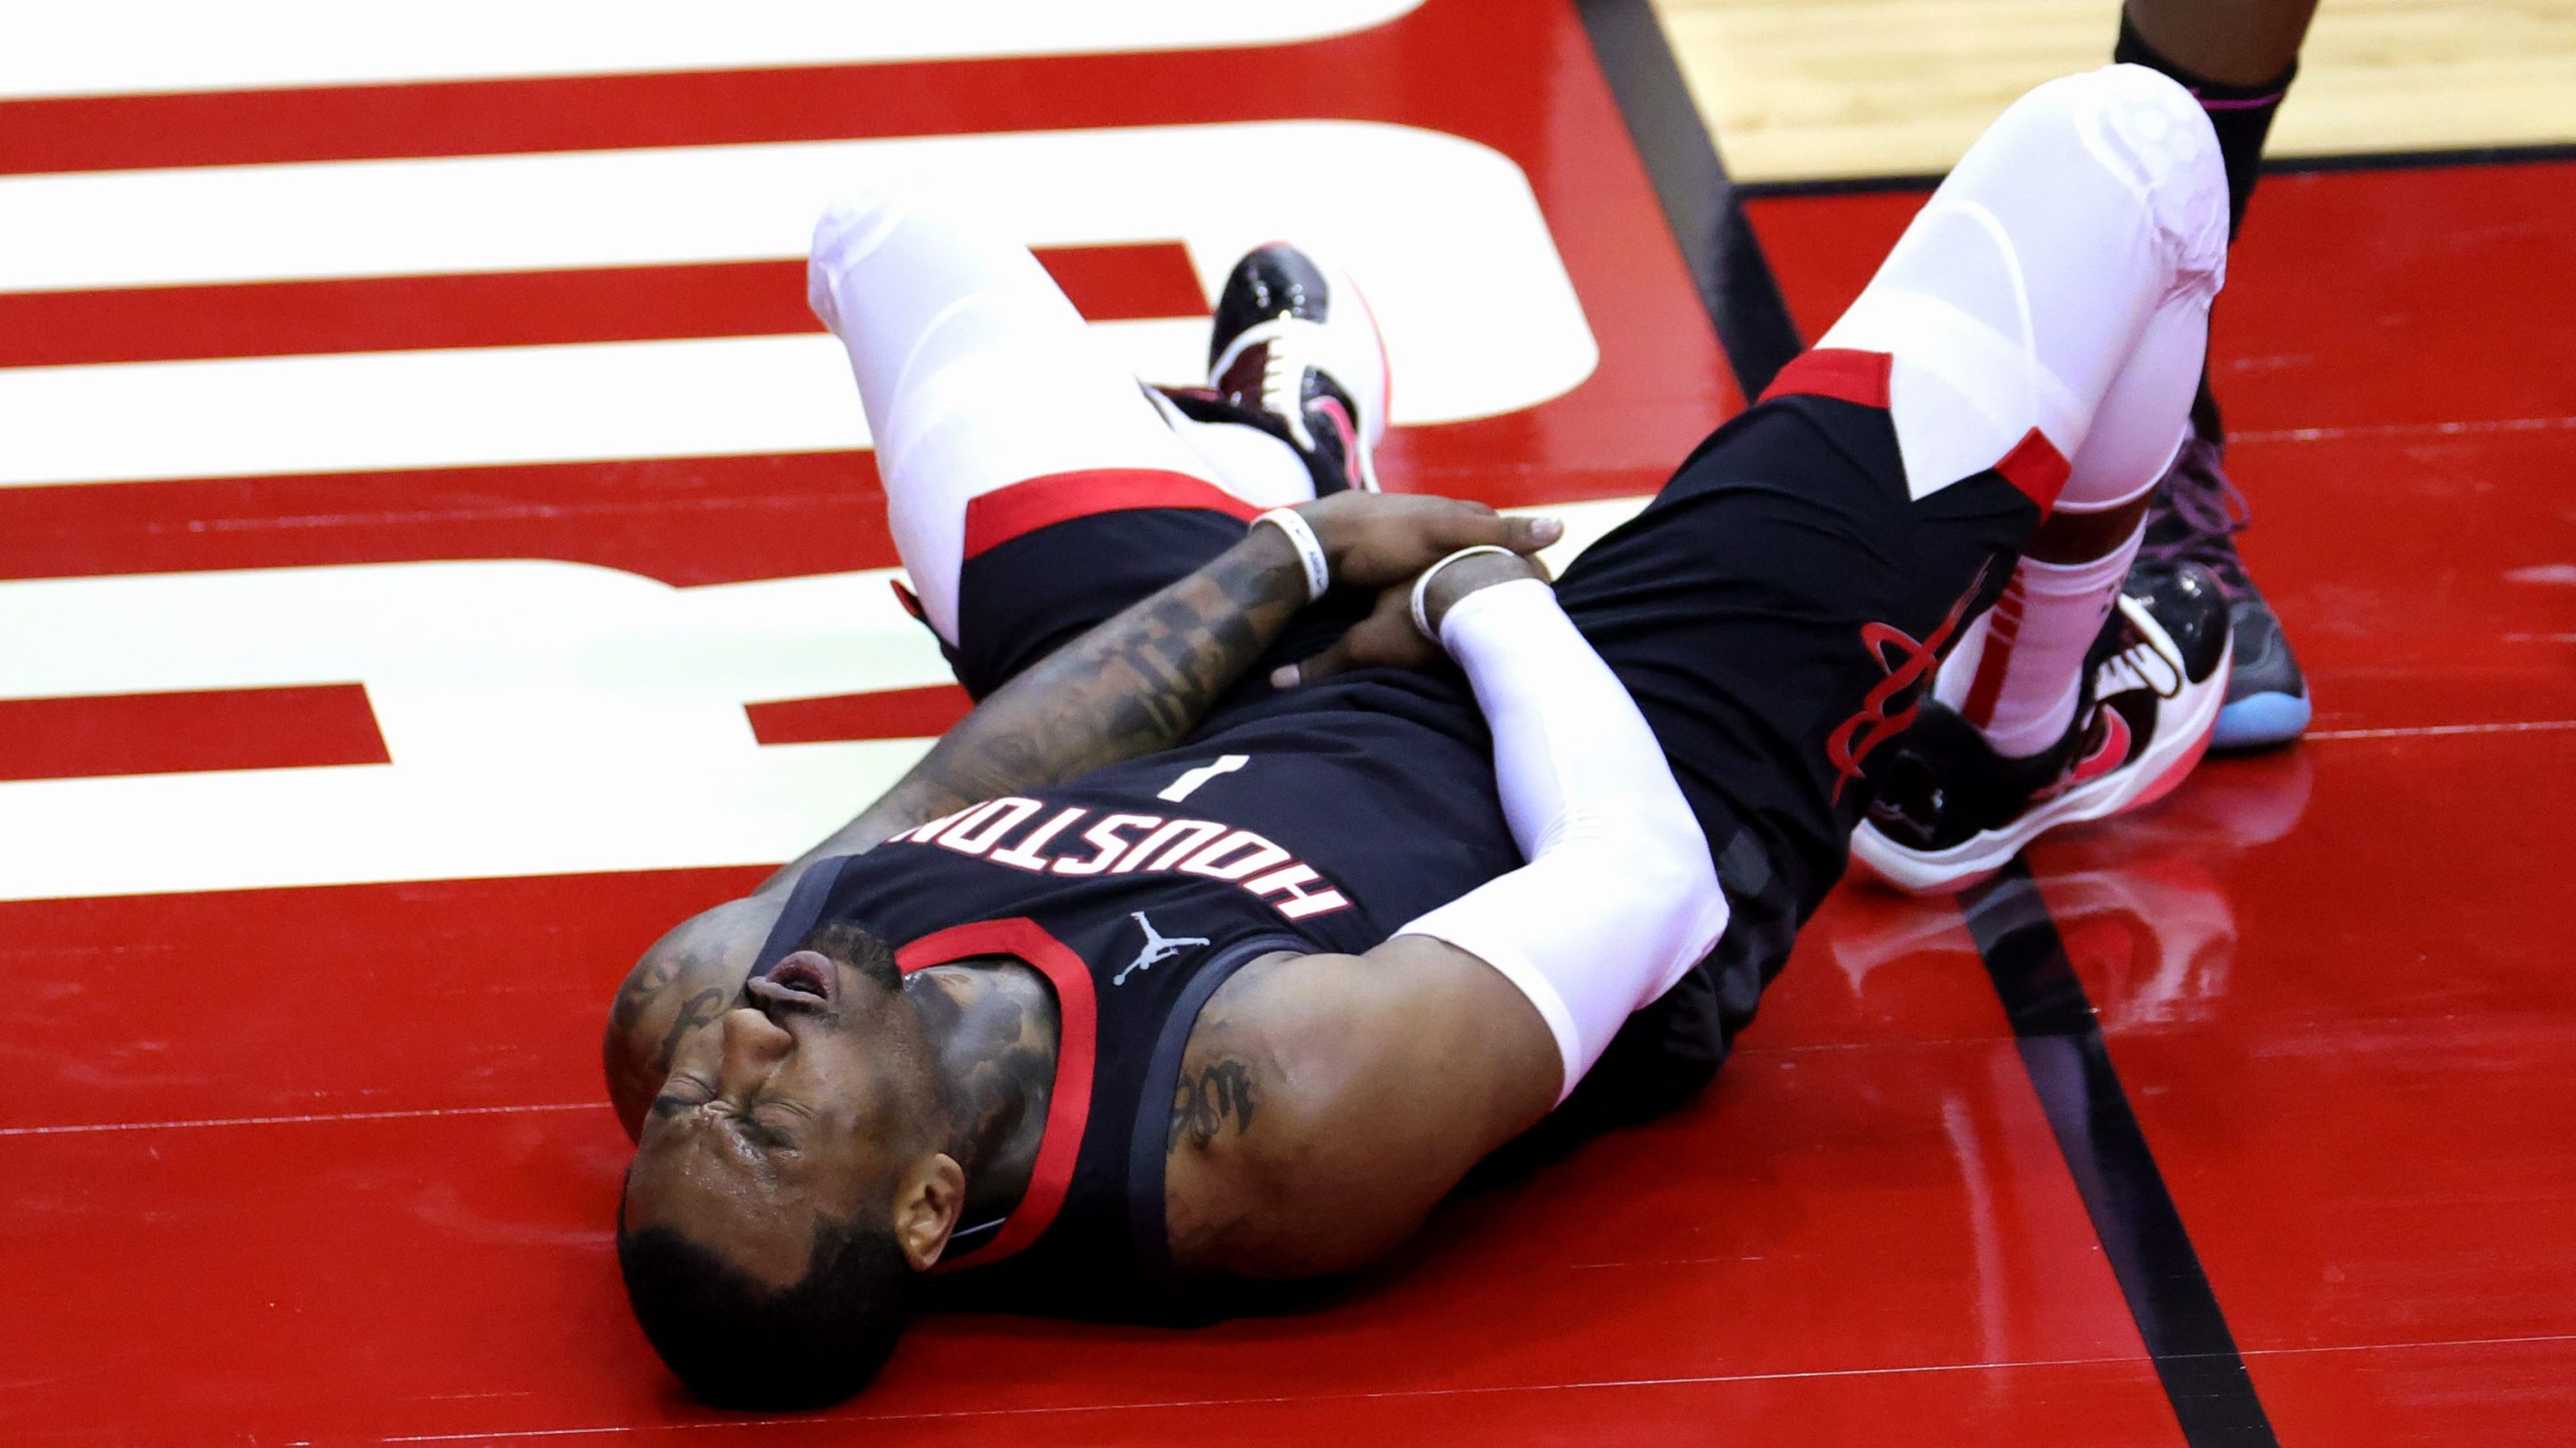 John Wall clutches his dick and balls on the floor of Rockets arena